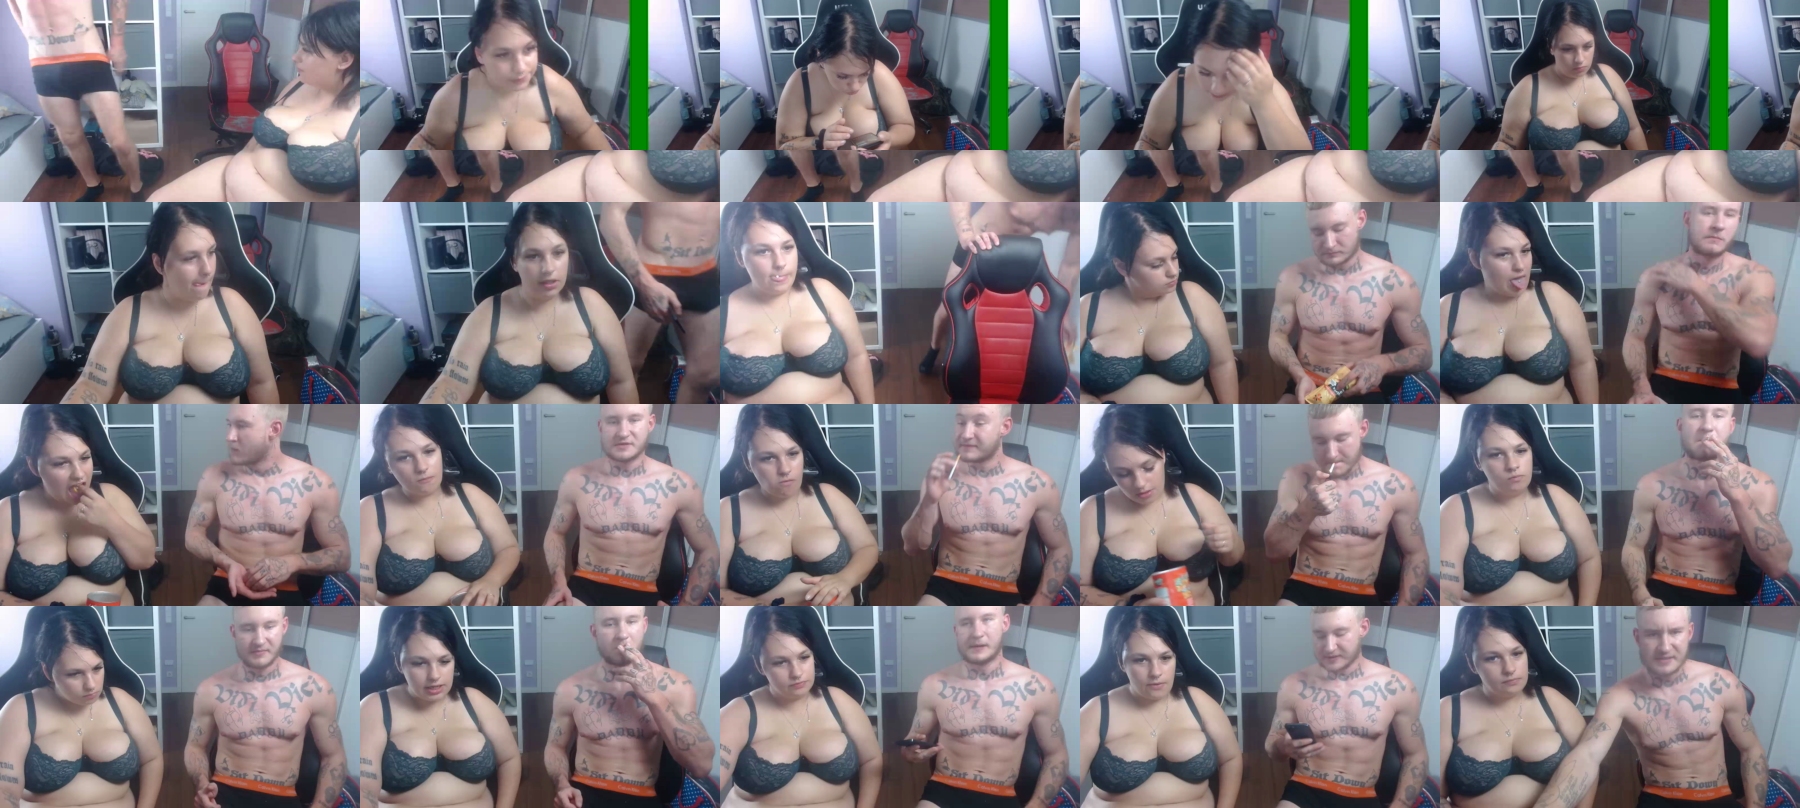 BADEX20  15-09-2021 Recorded Video Topless